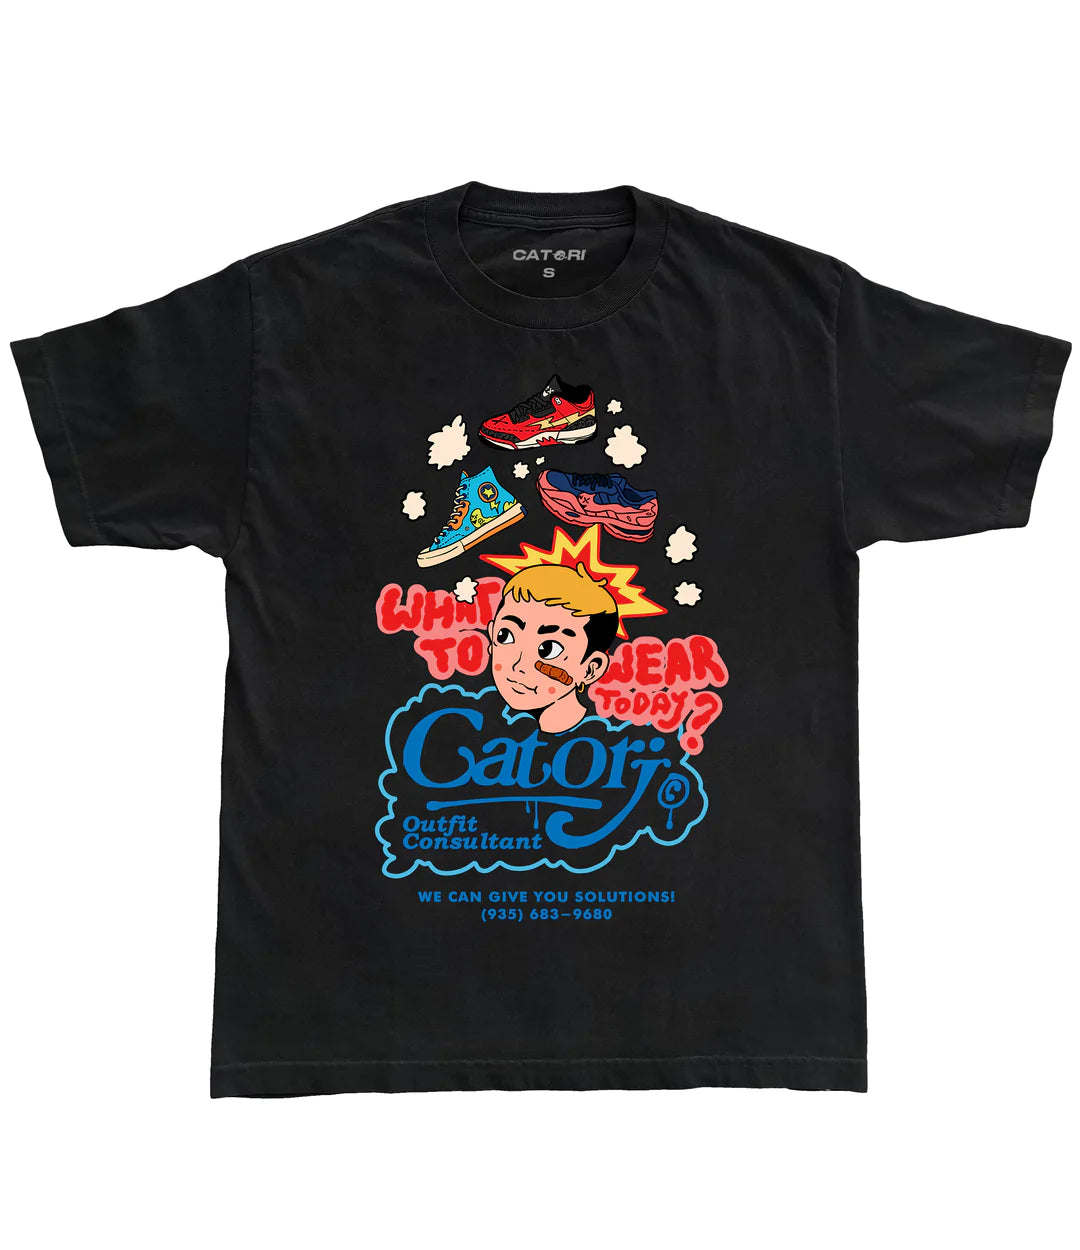 Graphic Tees: How to Stay Ahead of the Graphic Tee Curve - streetwear at Catori Clothing | Graphic & Anime Tees, Hoodies & Sweatshirts 